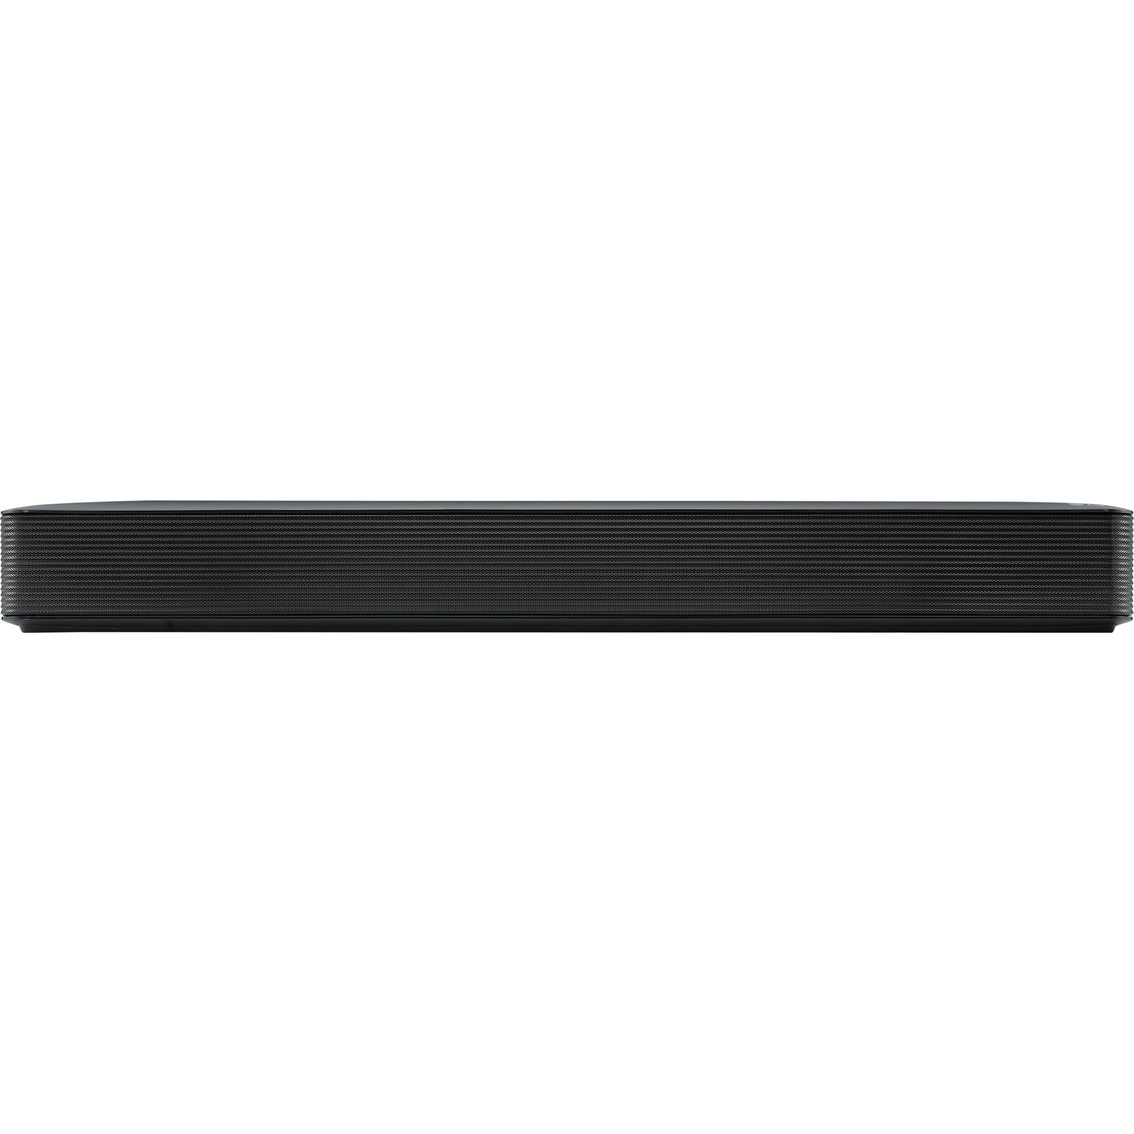 LG SK1 2.0 Channel Compact Sound Bar with Bluetooth Connectivity - Image 2 of 8